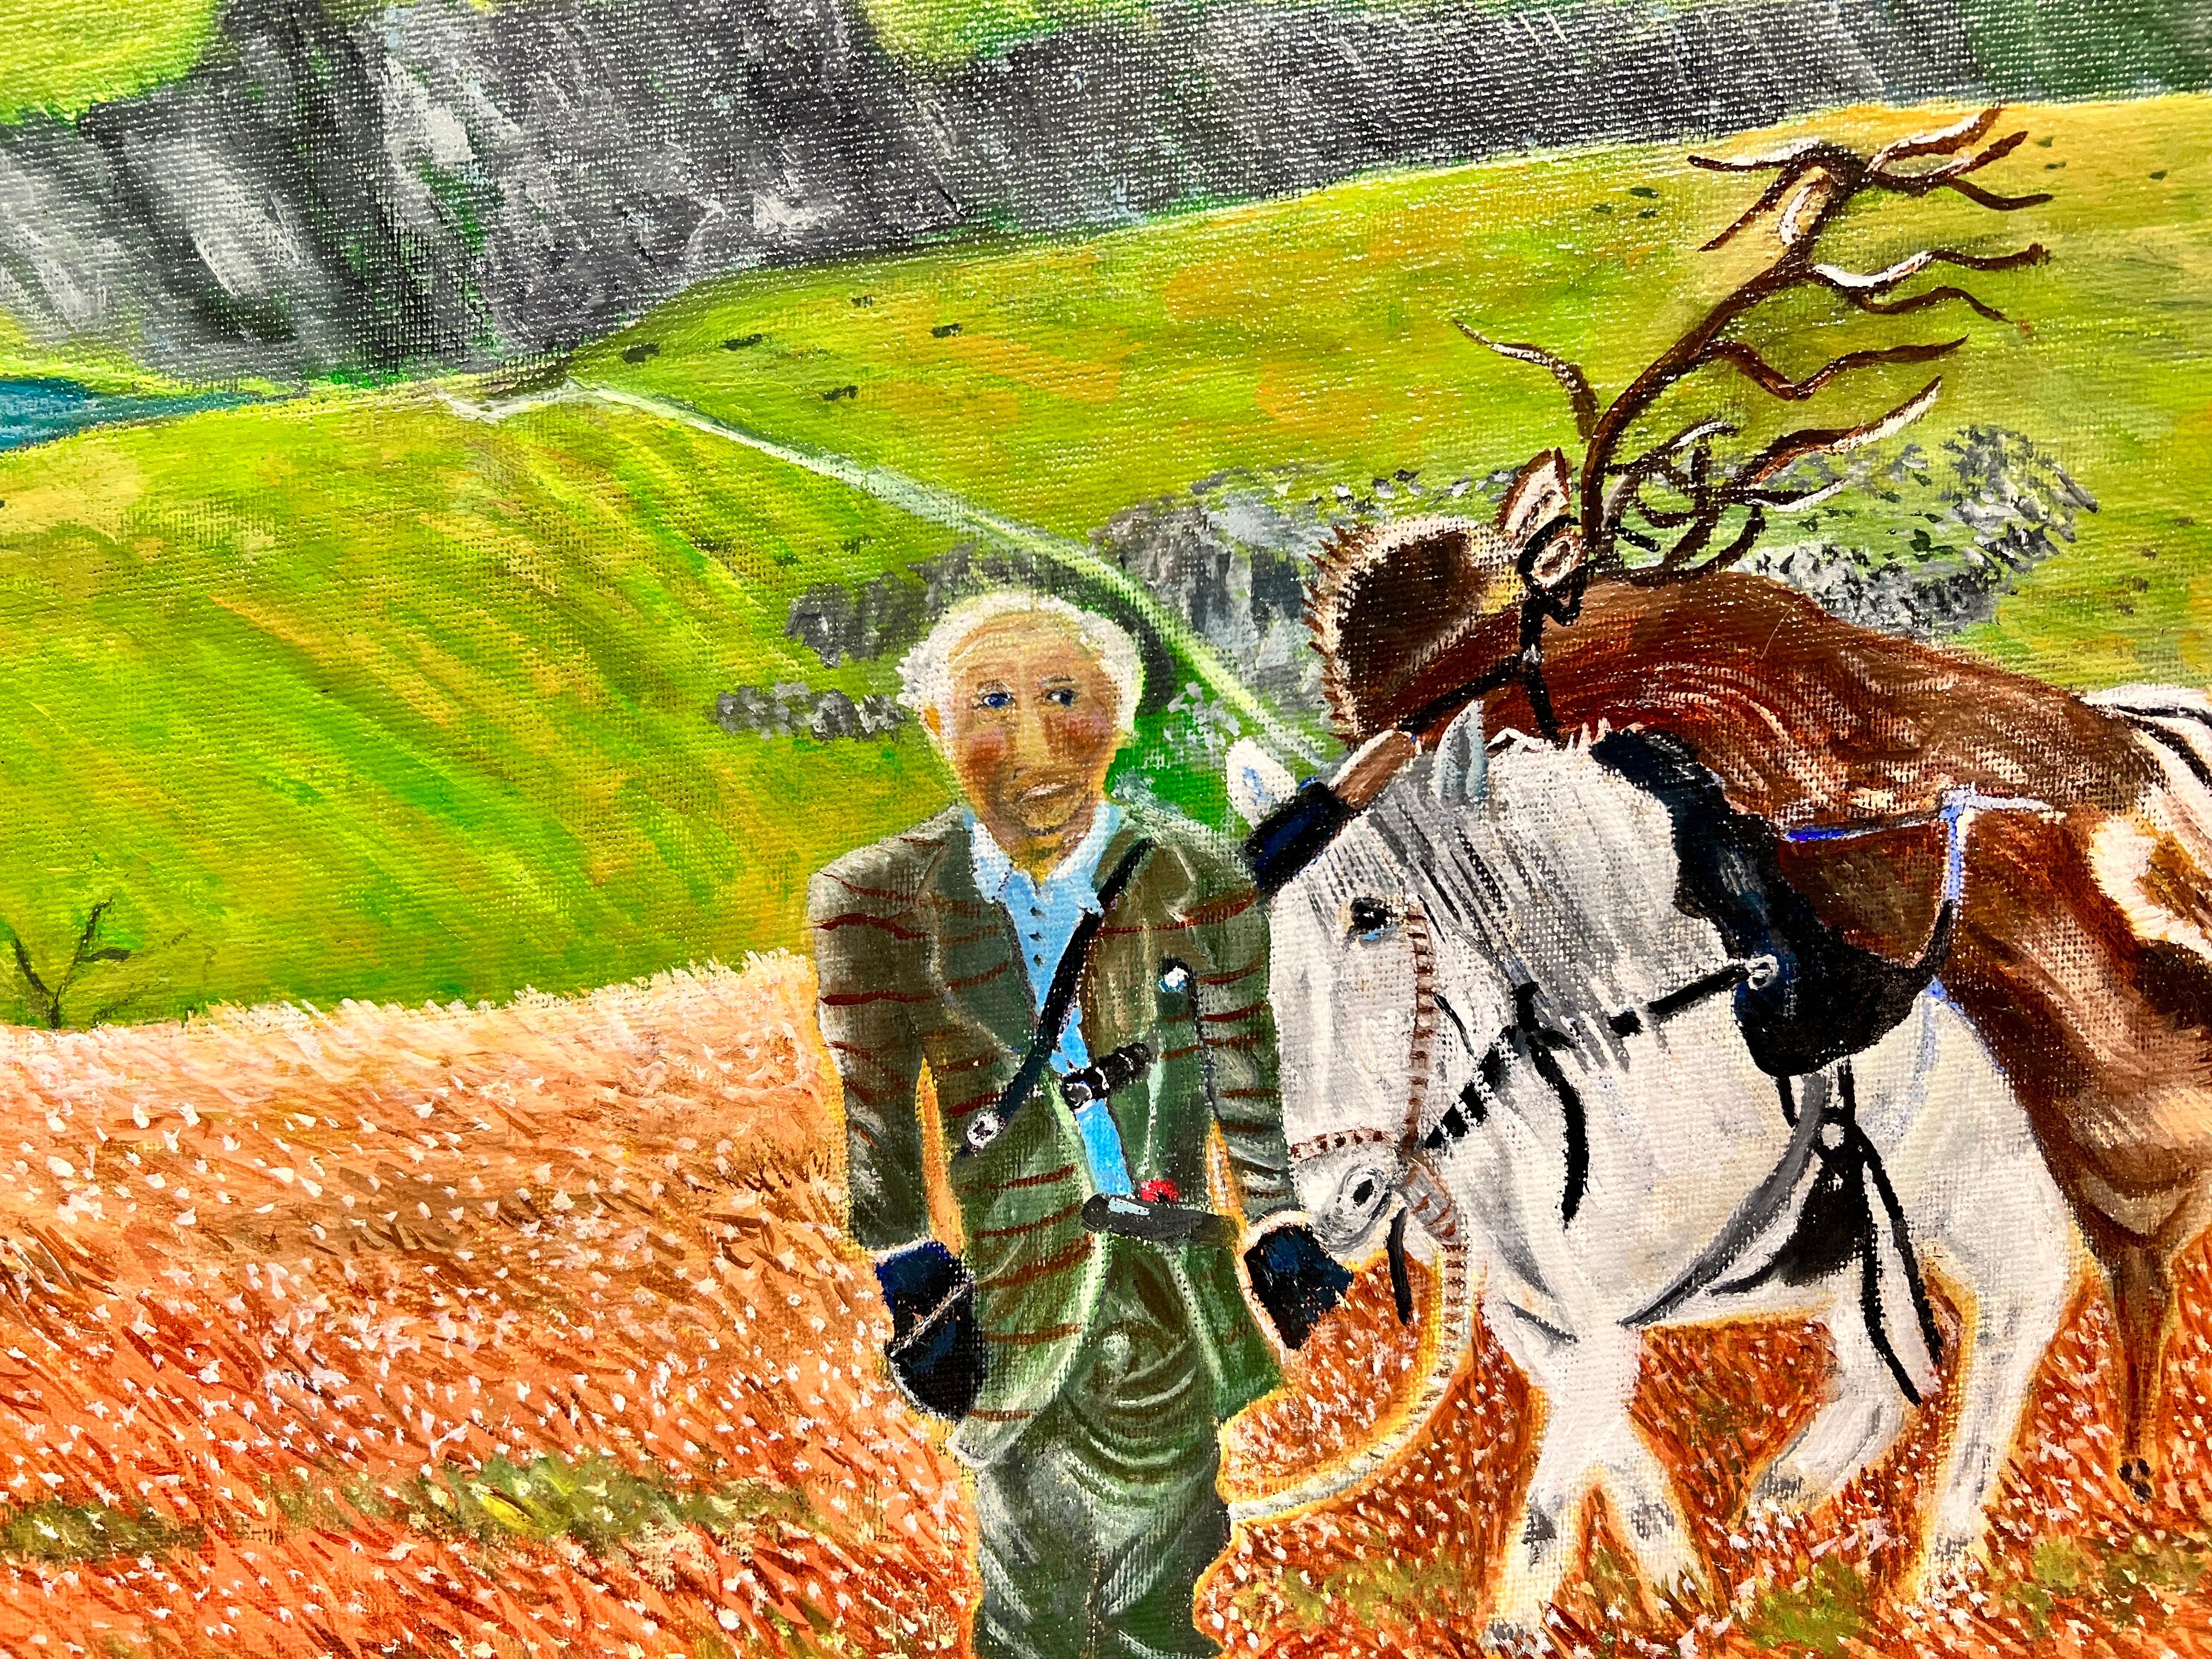 Gamekeeper Stalker in Scottish Highlands with Pony & Stag painting  - Painting by Ben Powell